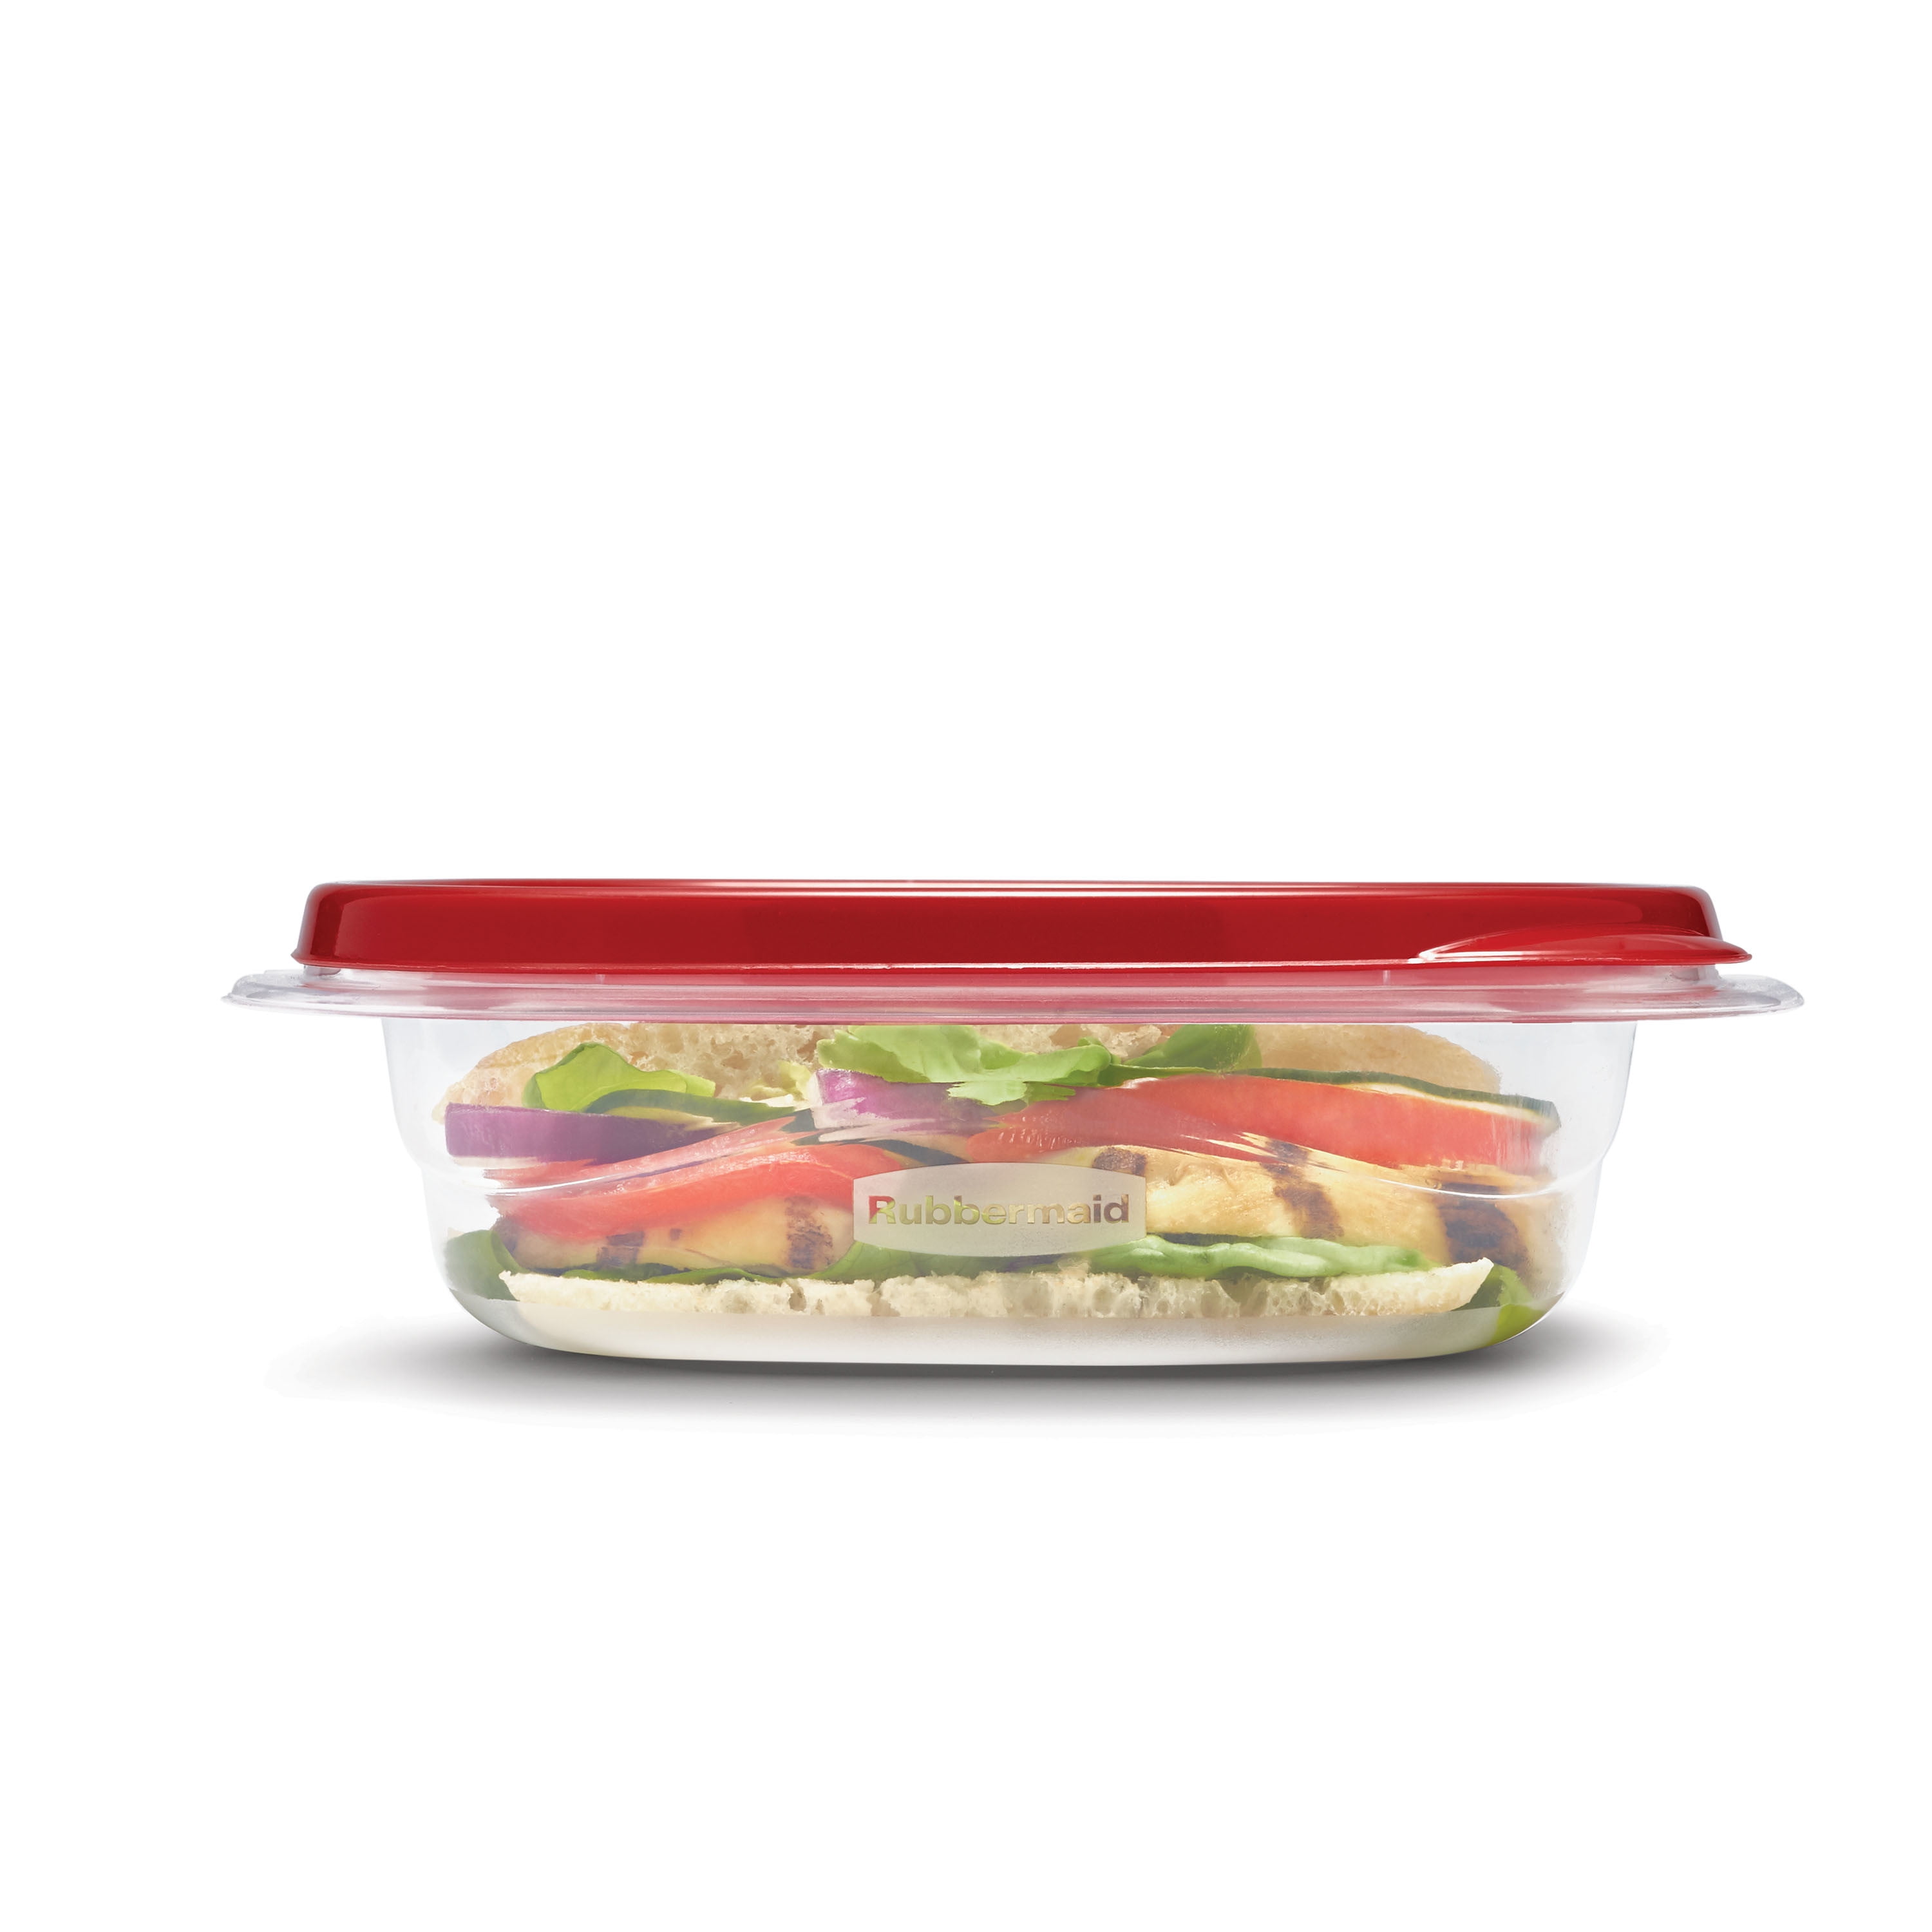 Rubbermaid TakeAlongs Mule Spice 2.9 Cup Squares Containers, 4-Pack